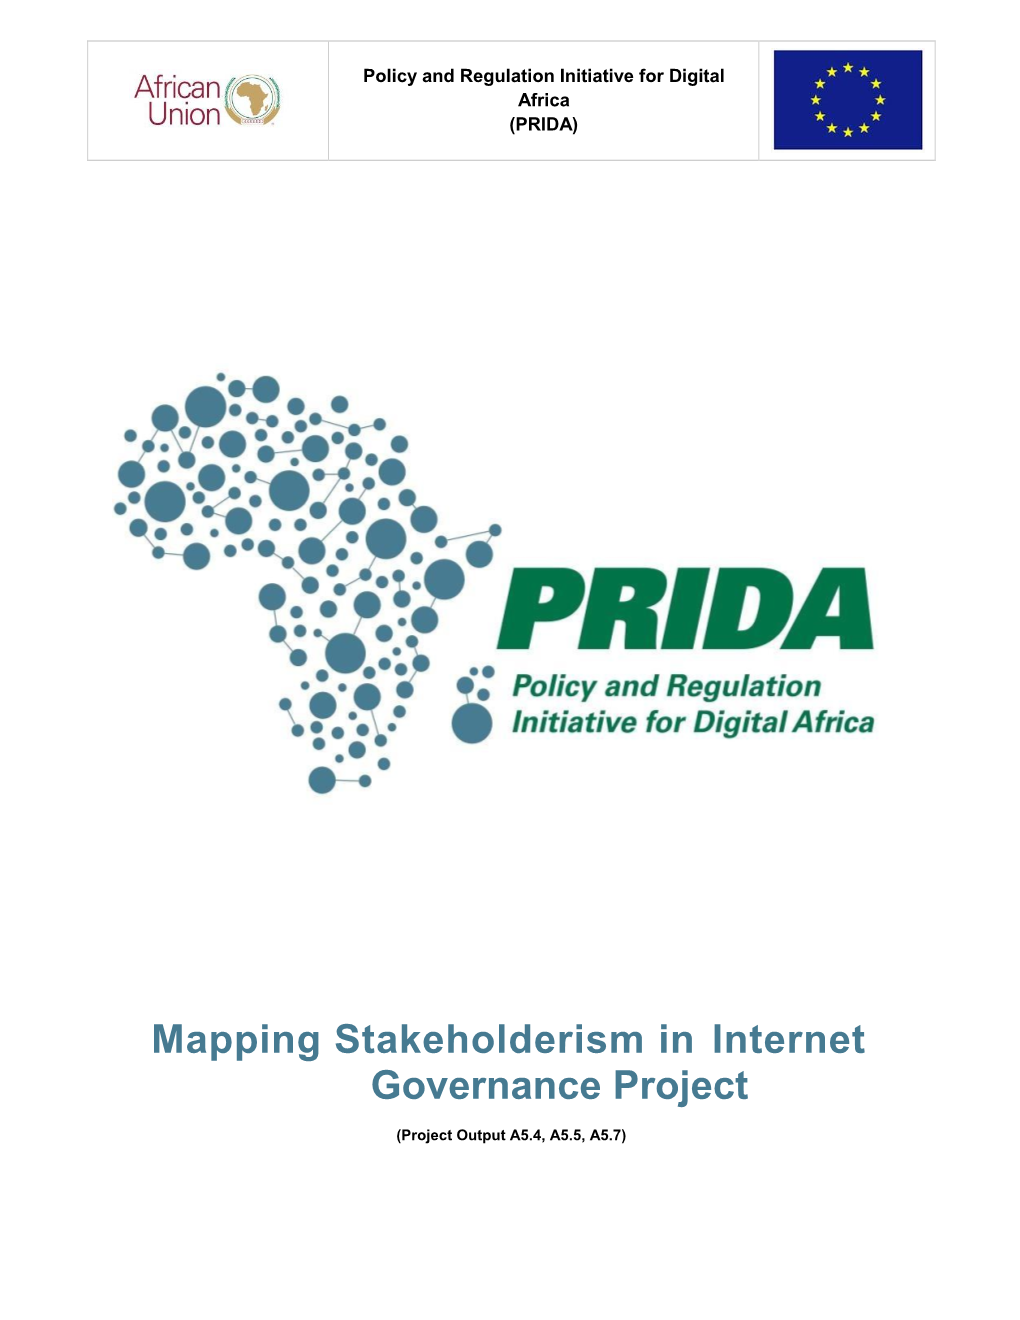 Mapping Stakeholderism in Internet Governance Project